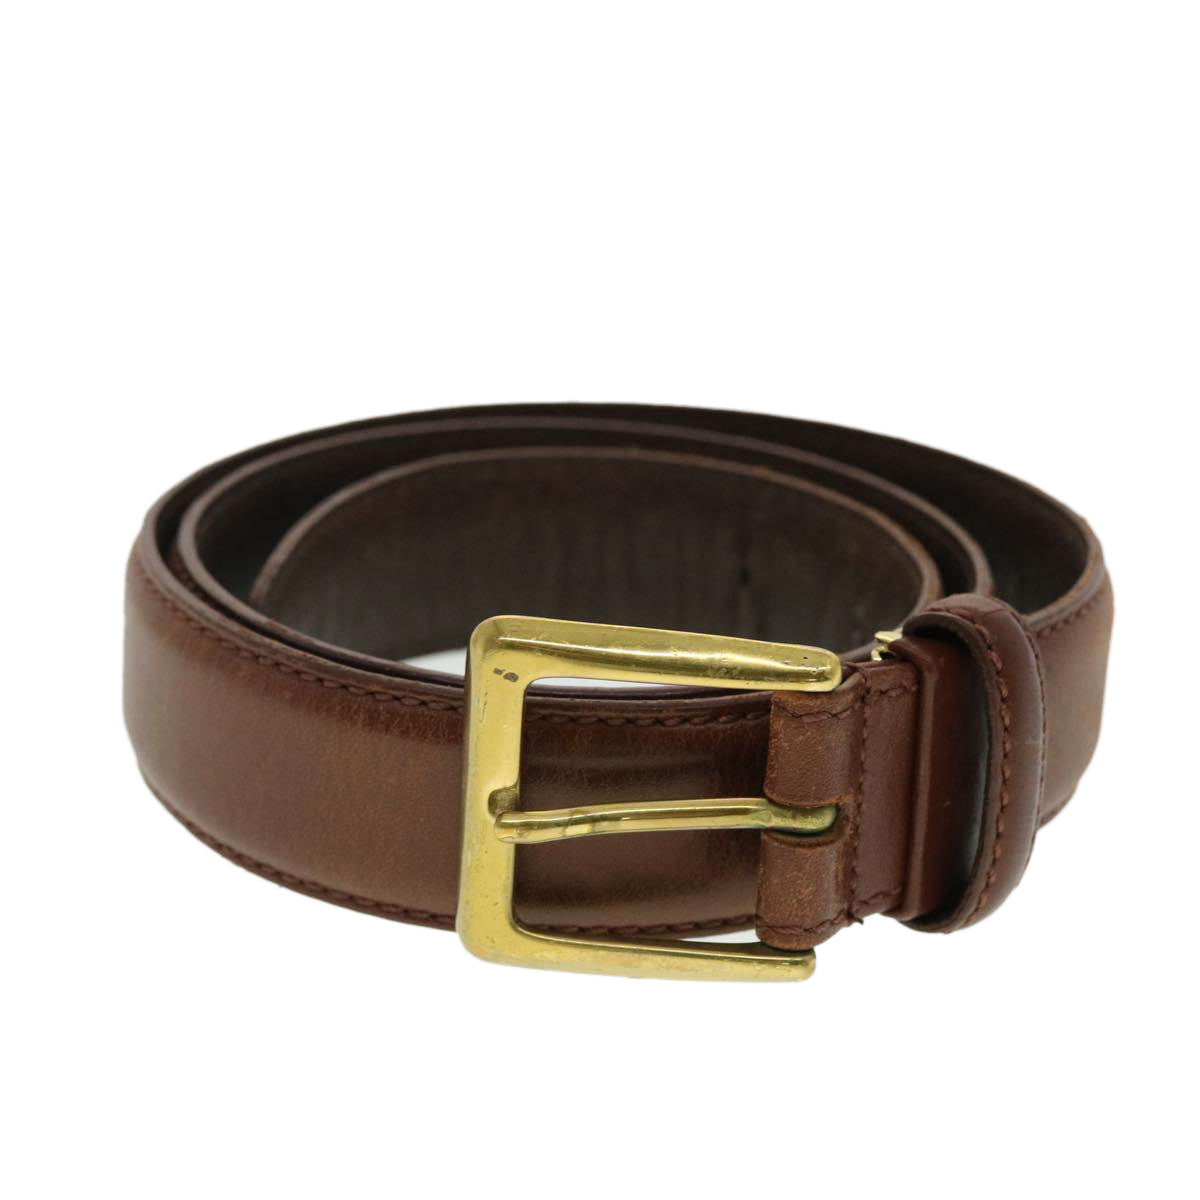 Christian Dior Belt Leather 36.2"" Brown Auth ti1042 - 0